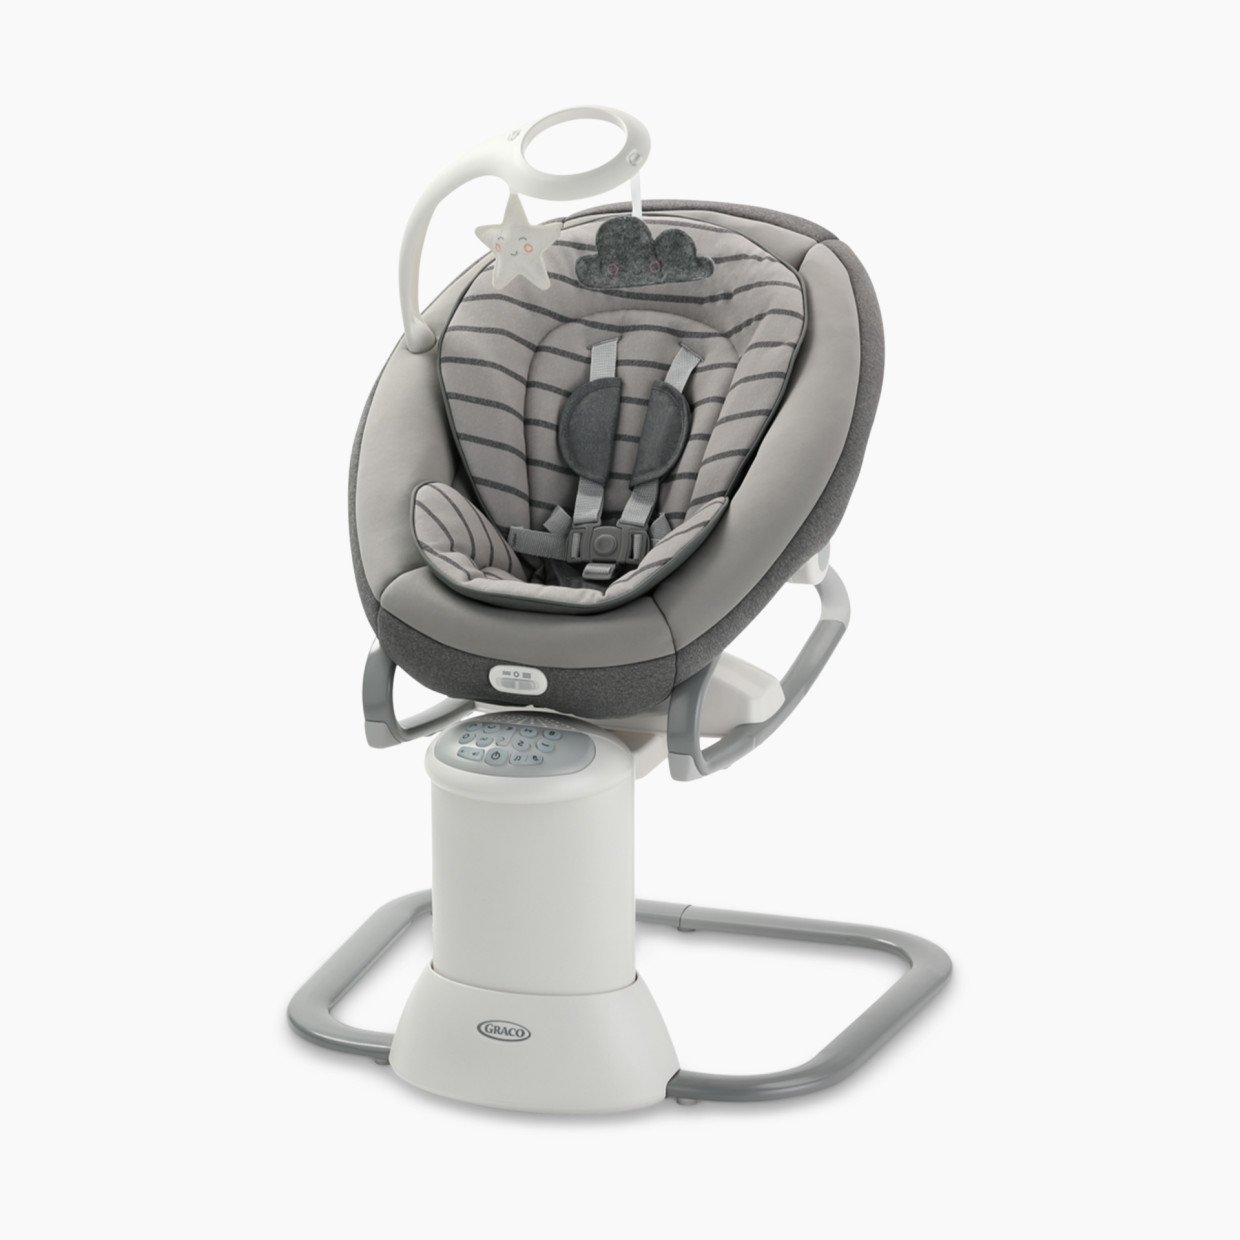 Graco Soothe My Way Swing with Removable Rocker - Maison.